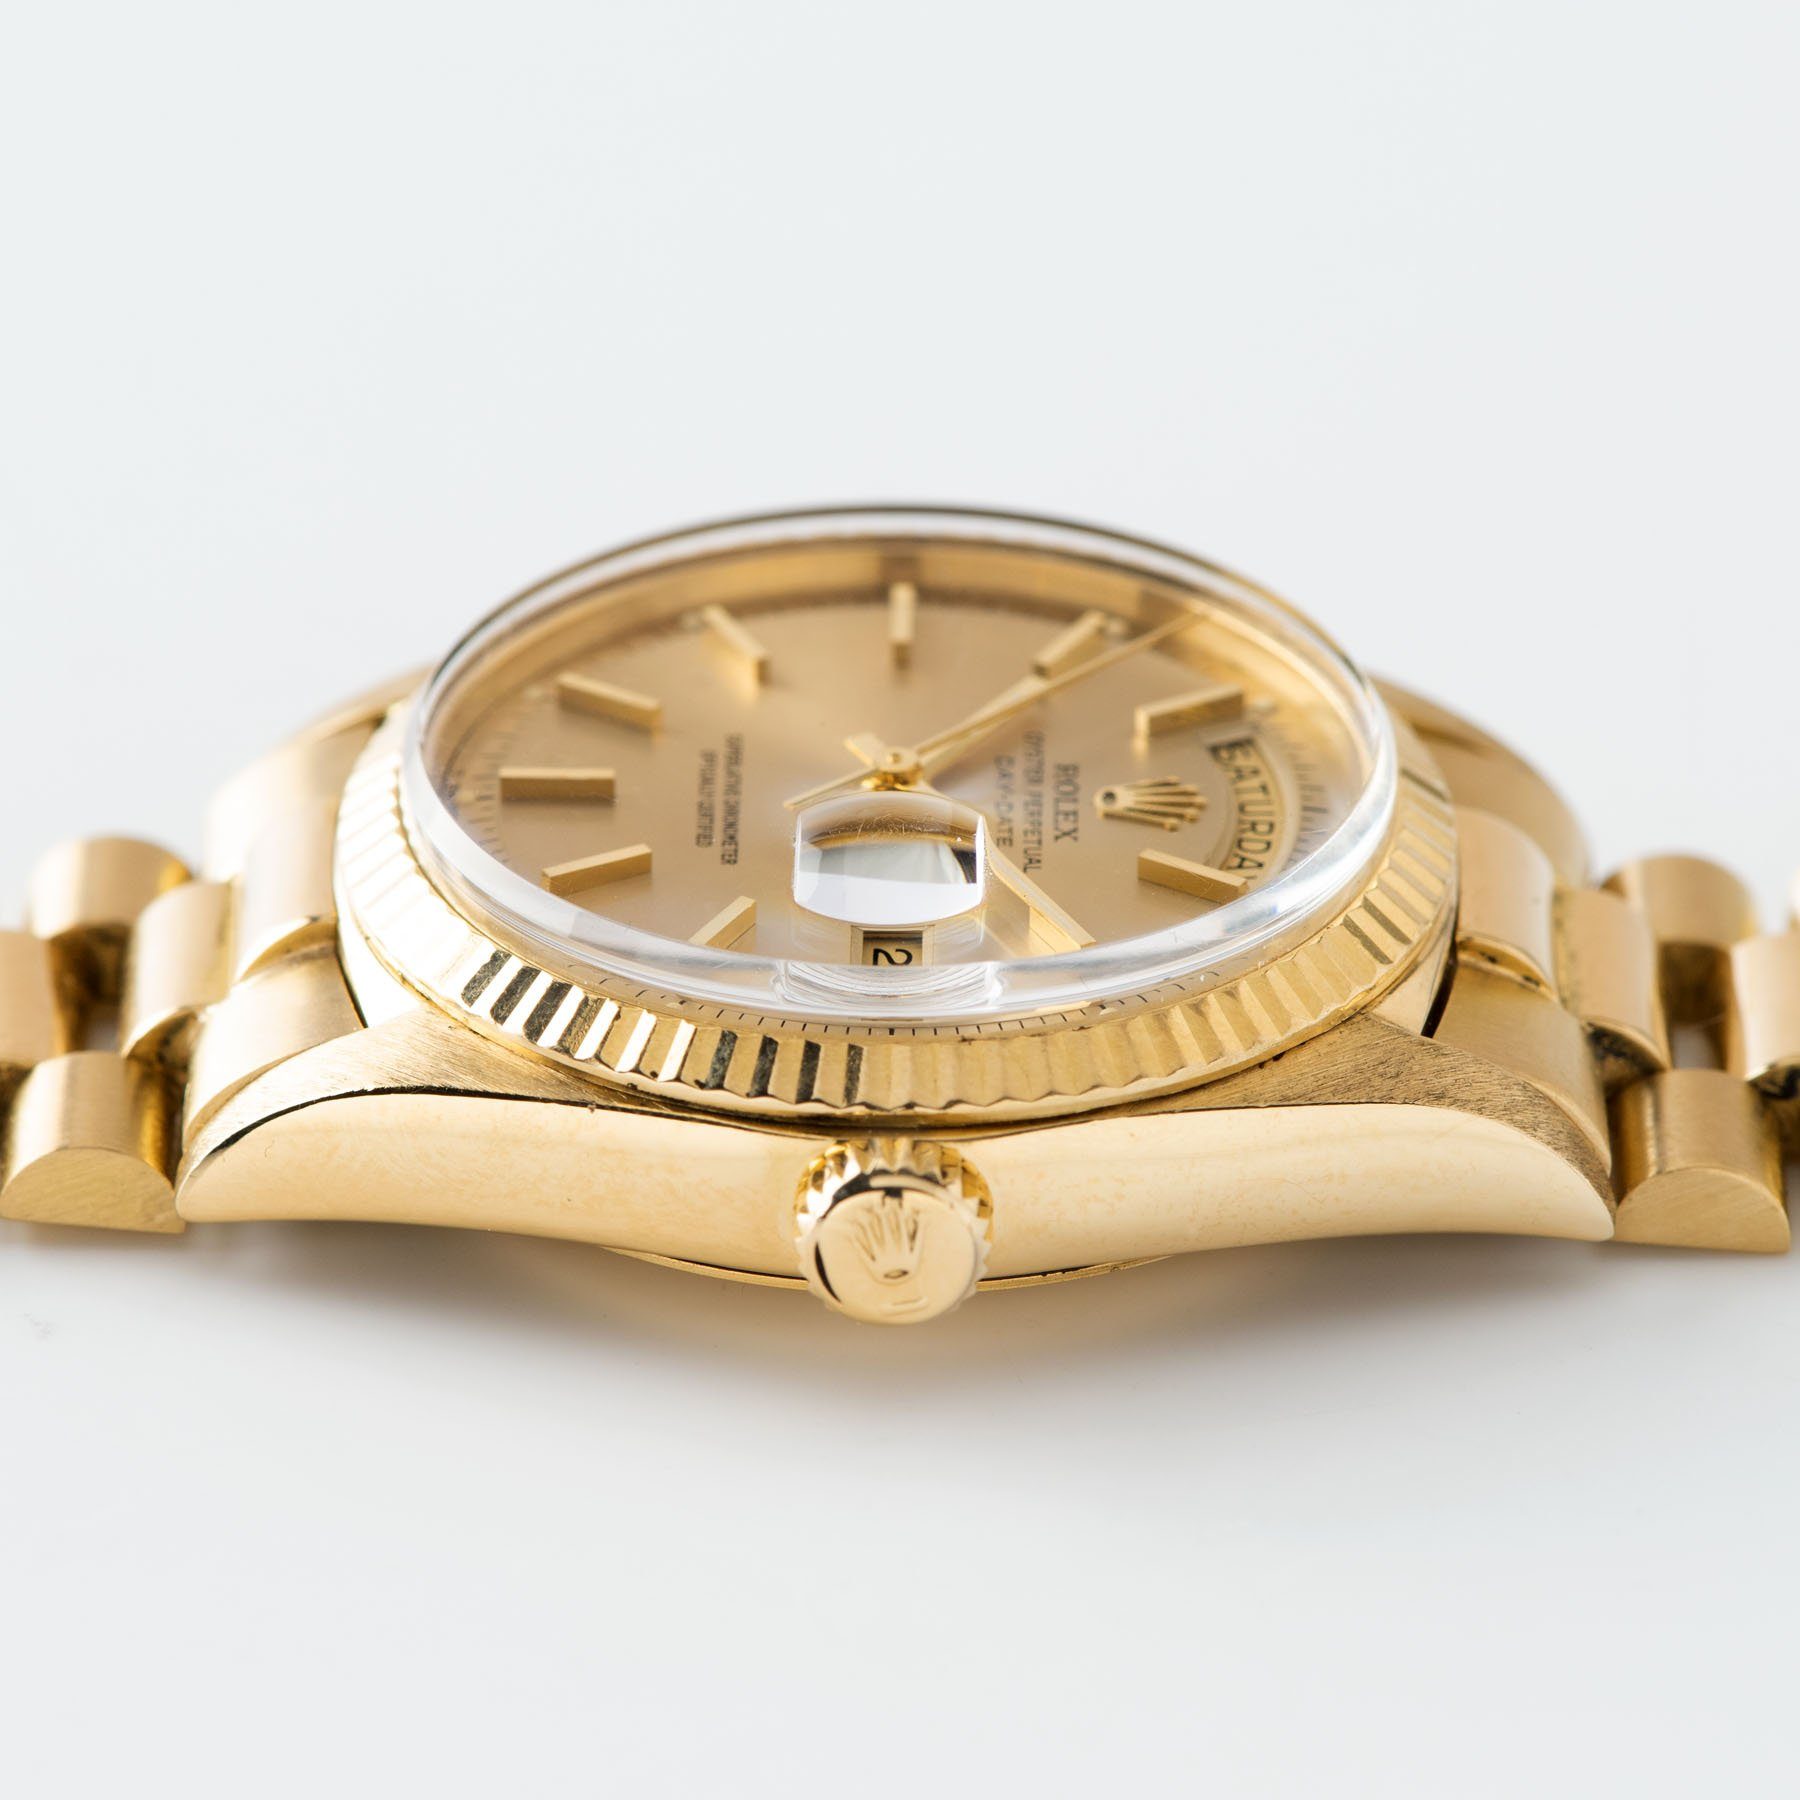 Rolex Day-Date Champagne Dial Yellow Gold 1803 cased detail with crown